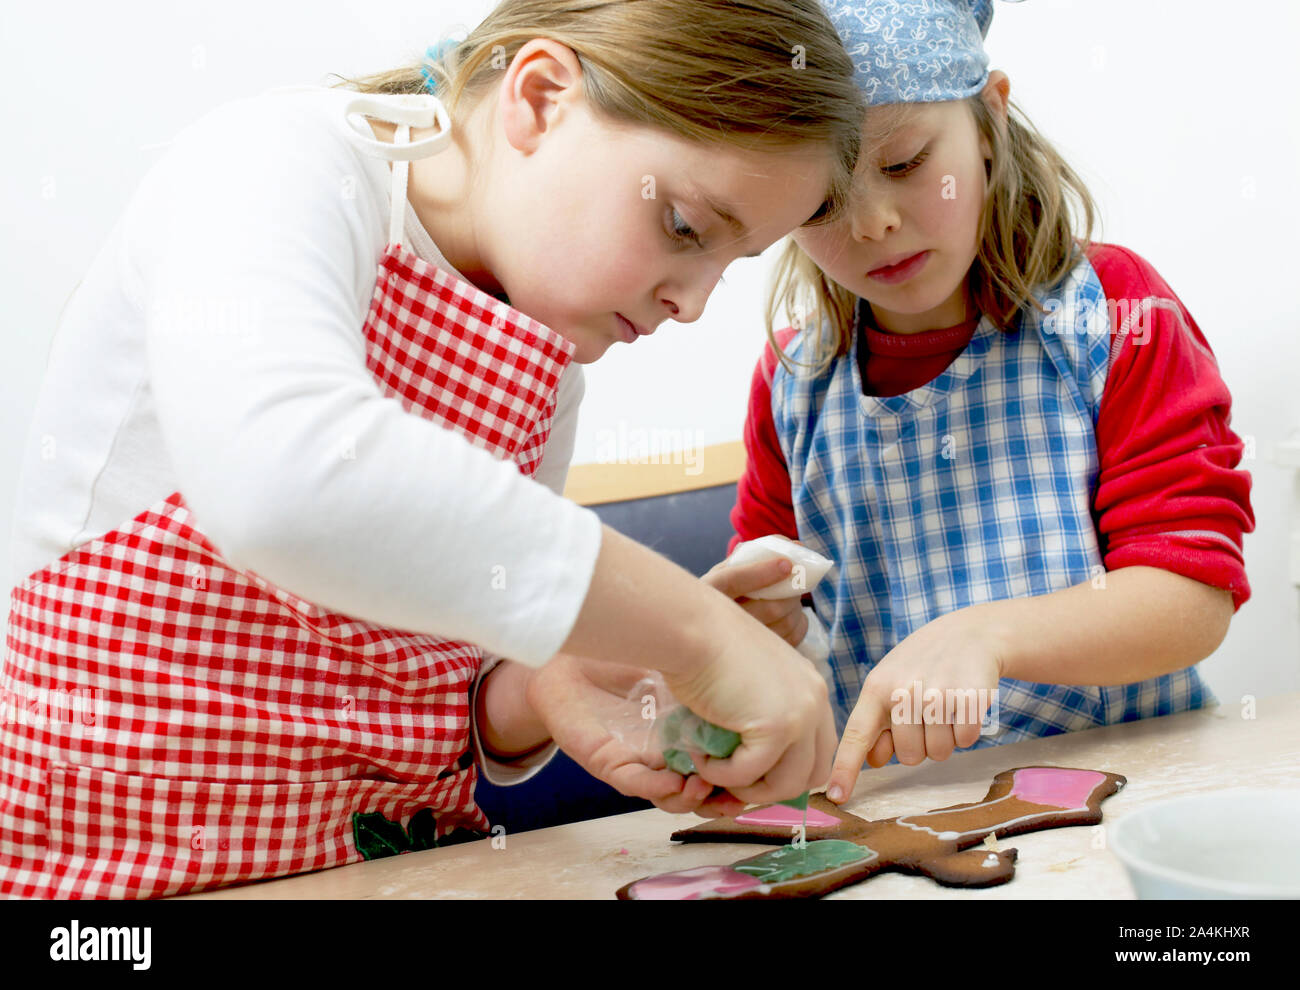 Two girls with headscarf and apron making homemade gingerbread. Stock Photo